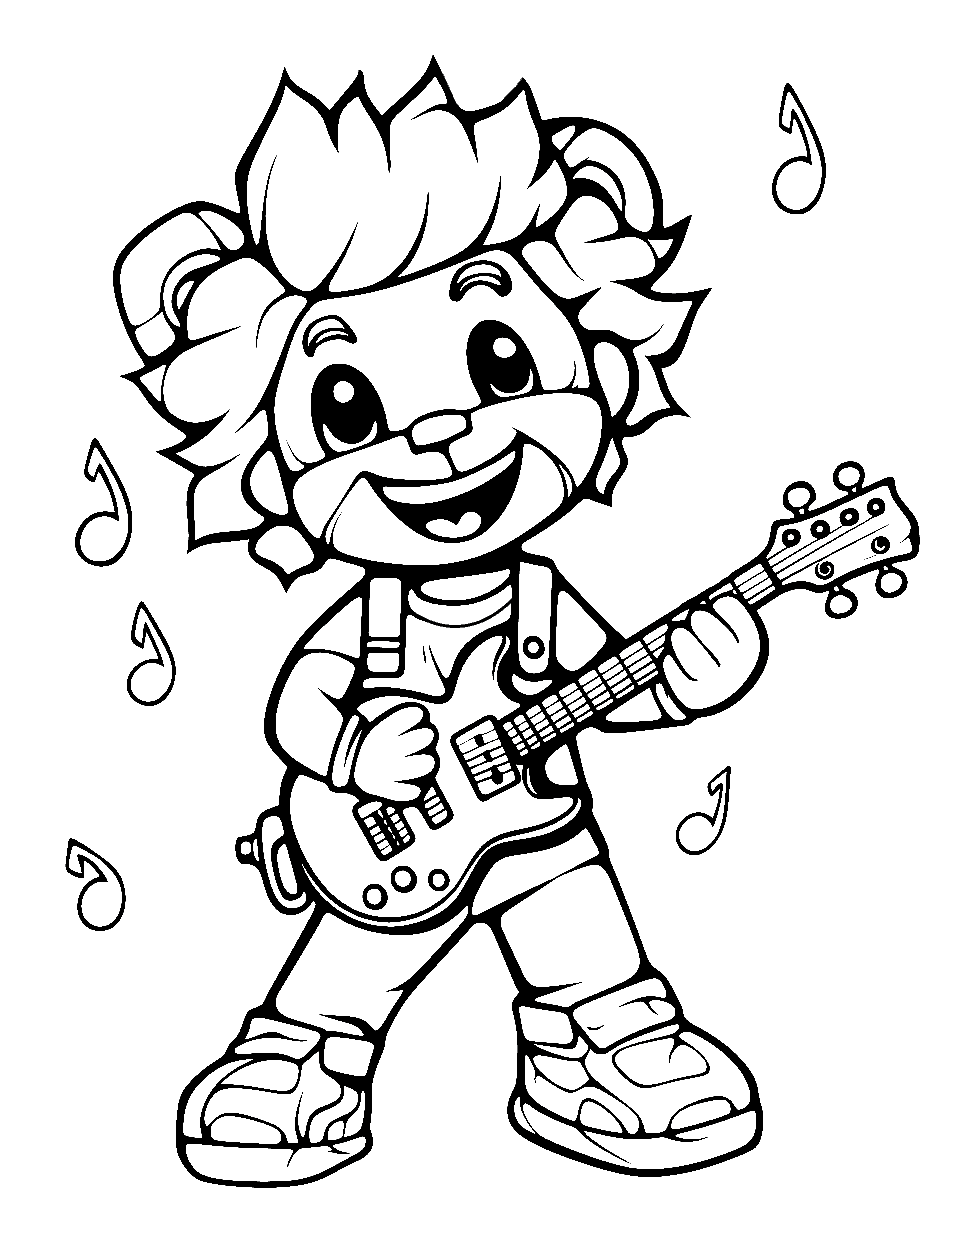 Glamrock Performance Coloring Page - A Glamrock animatronic performing enthusiastically on stage.